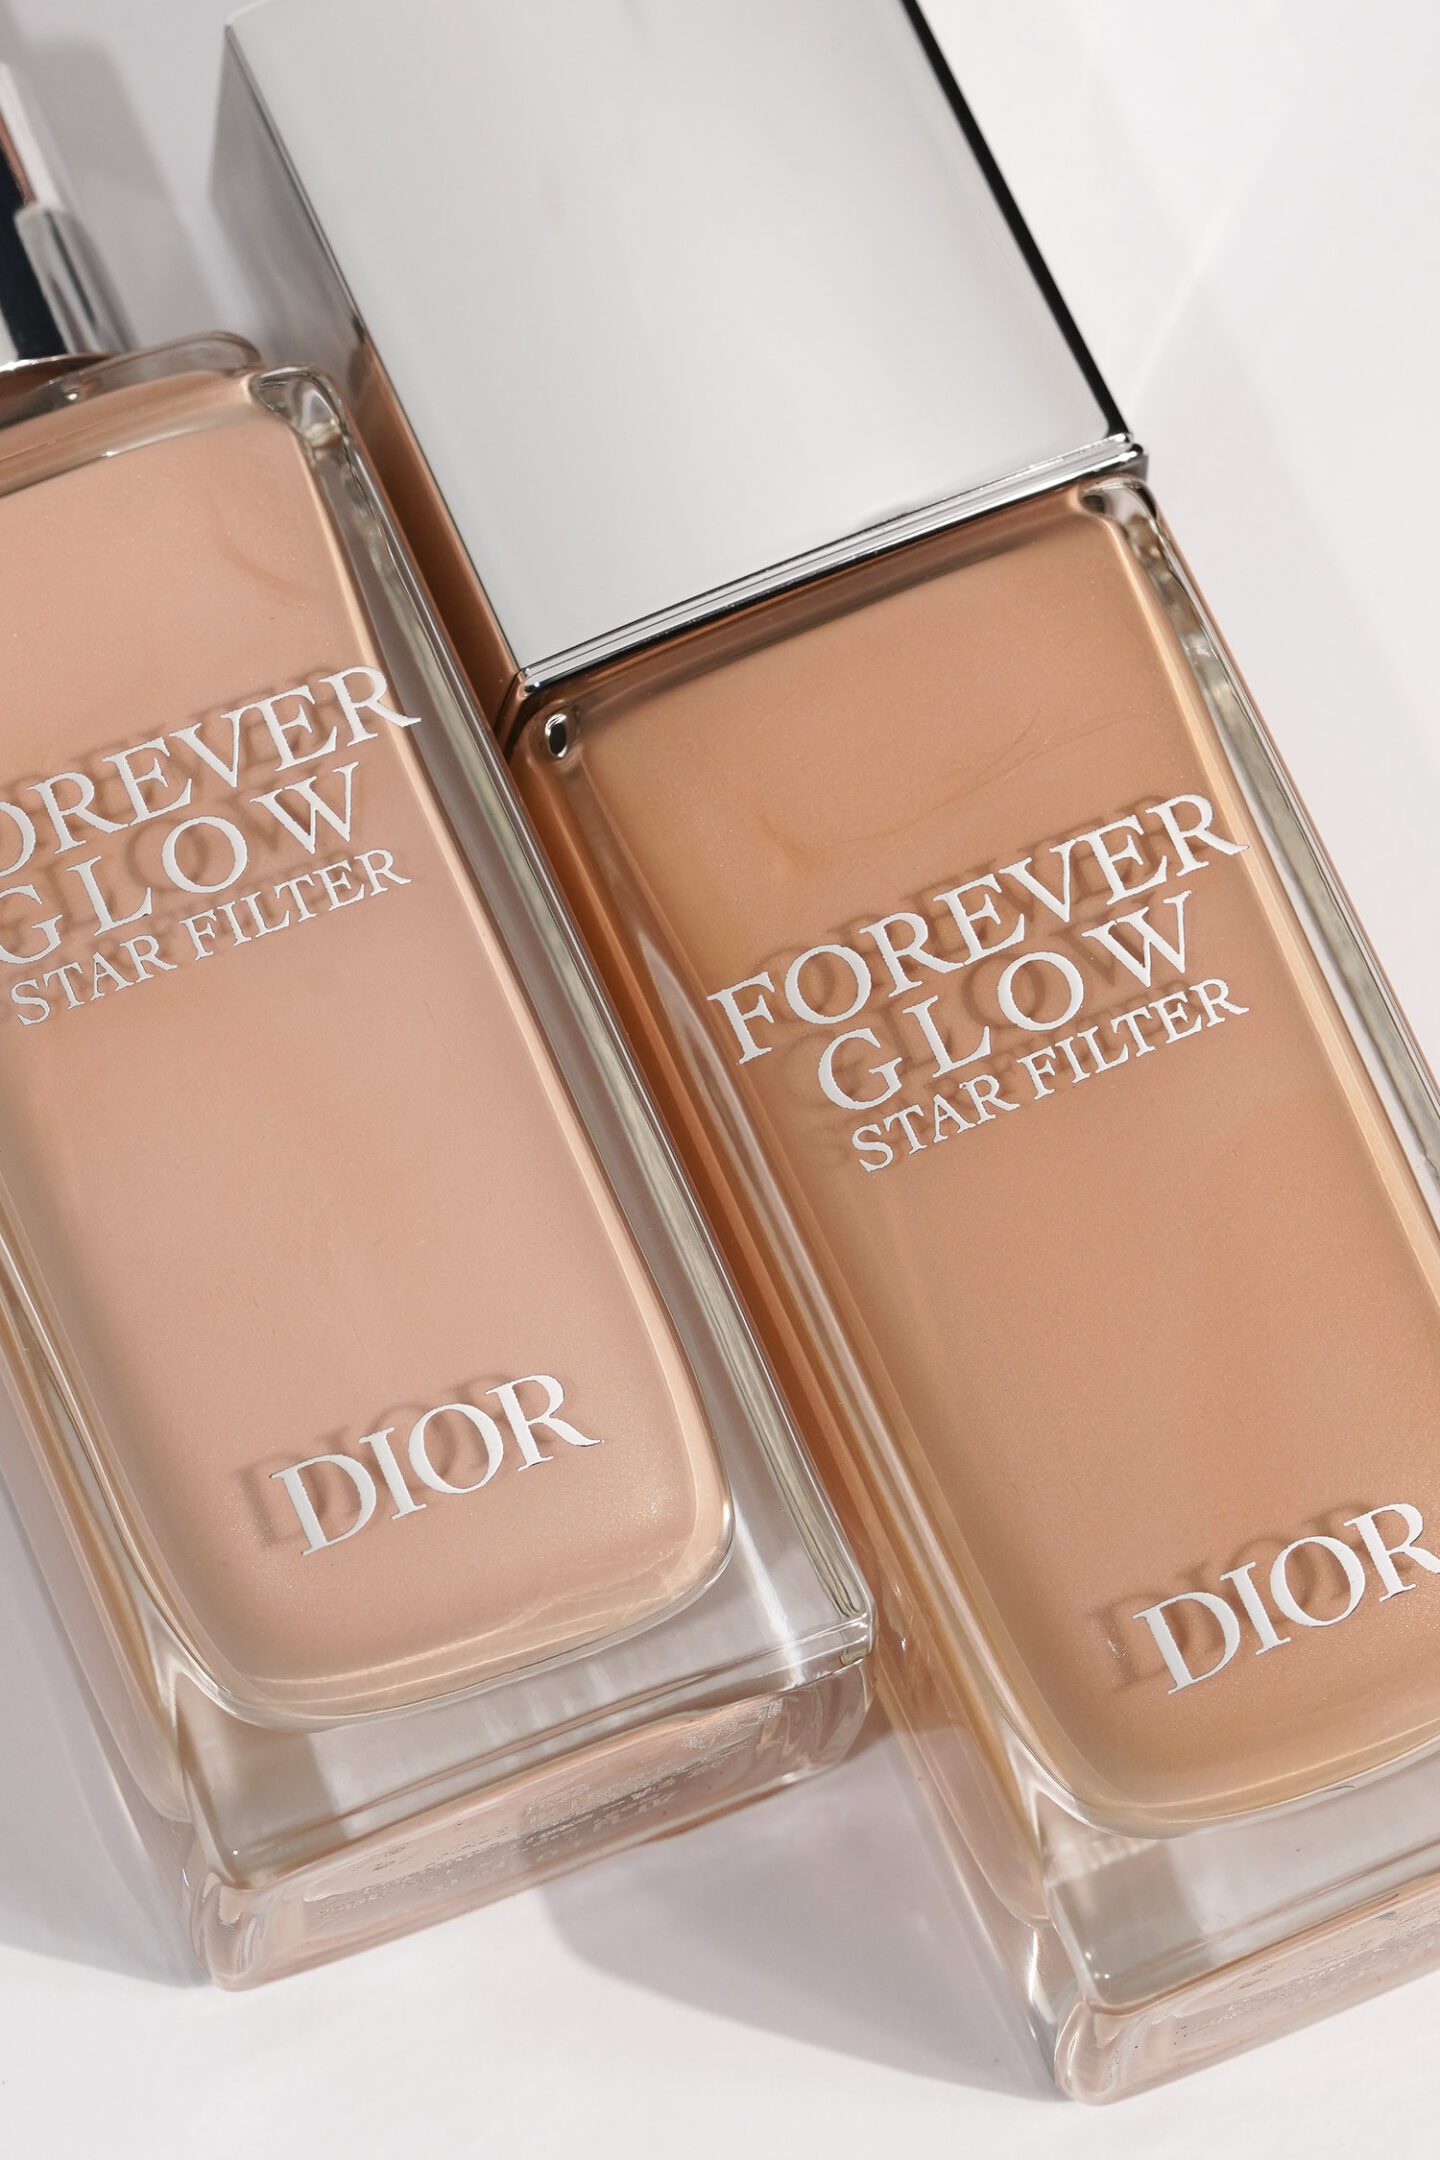 Dior Beauty Forever Glow Star Filter Shade 2 and 3